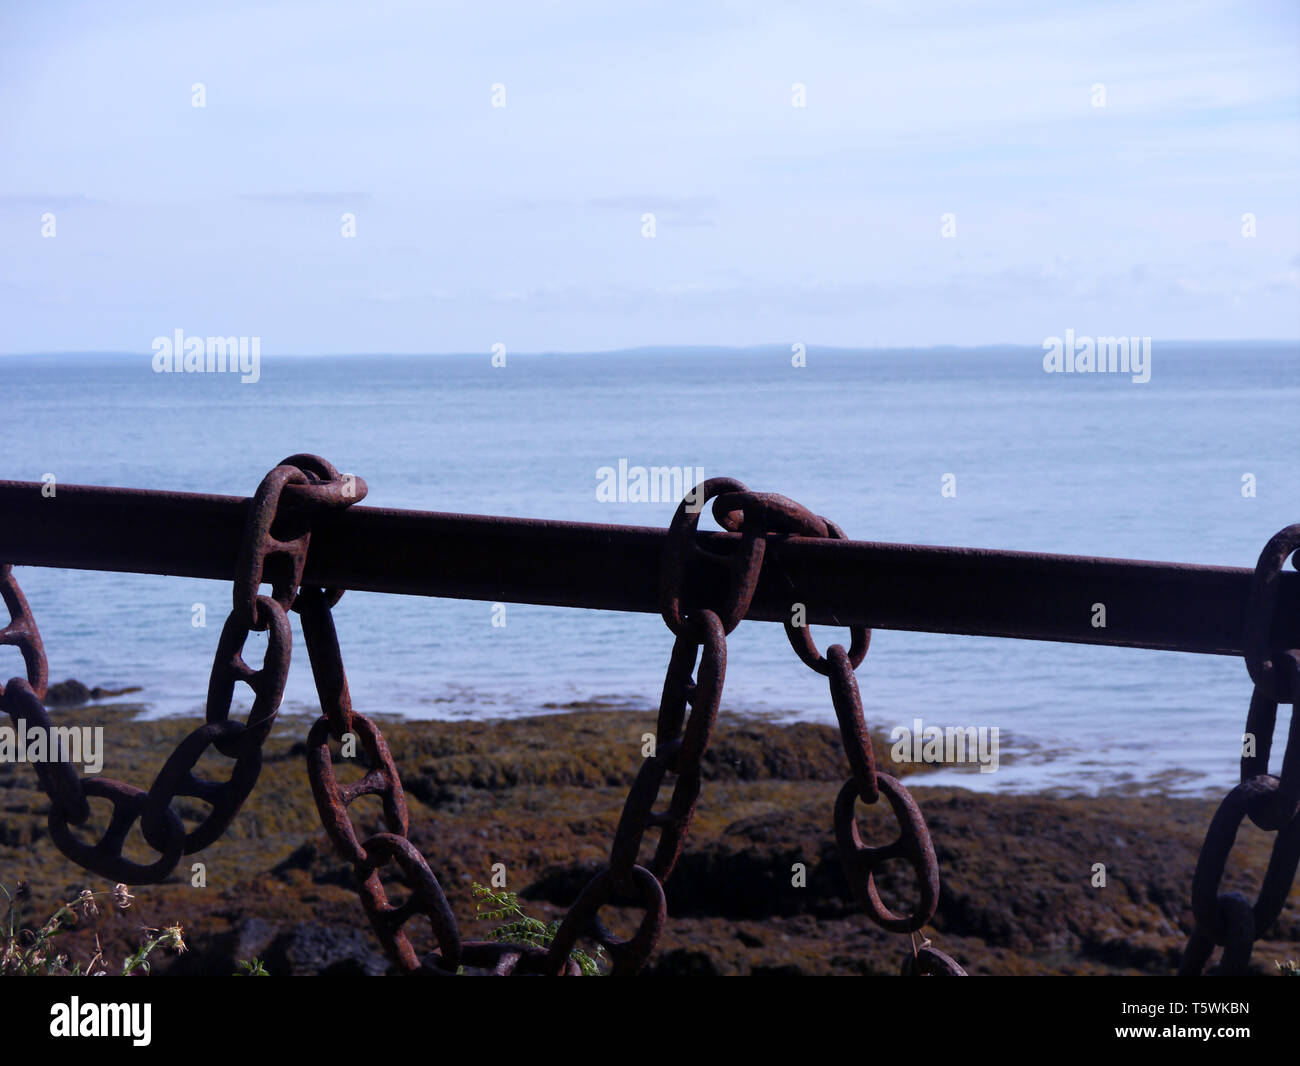 A Novel Old Rusty Iron Chain Link Fence Outside the Restored Fortress at Fliquet Bay on the Island of Jersey, Channel Isles, UK. Stock Photo